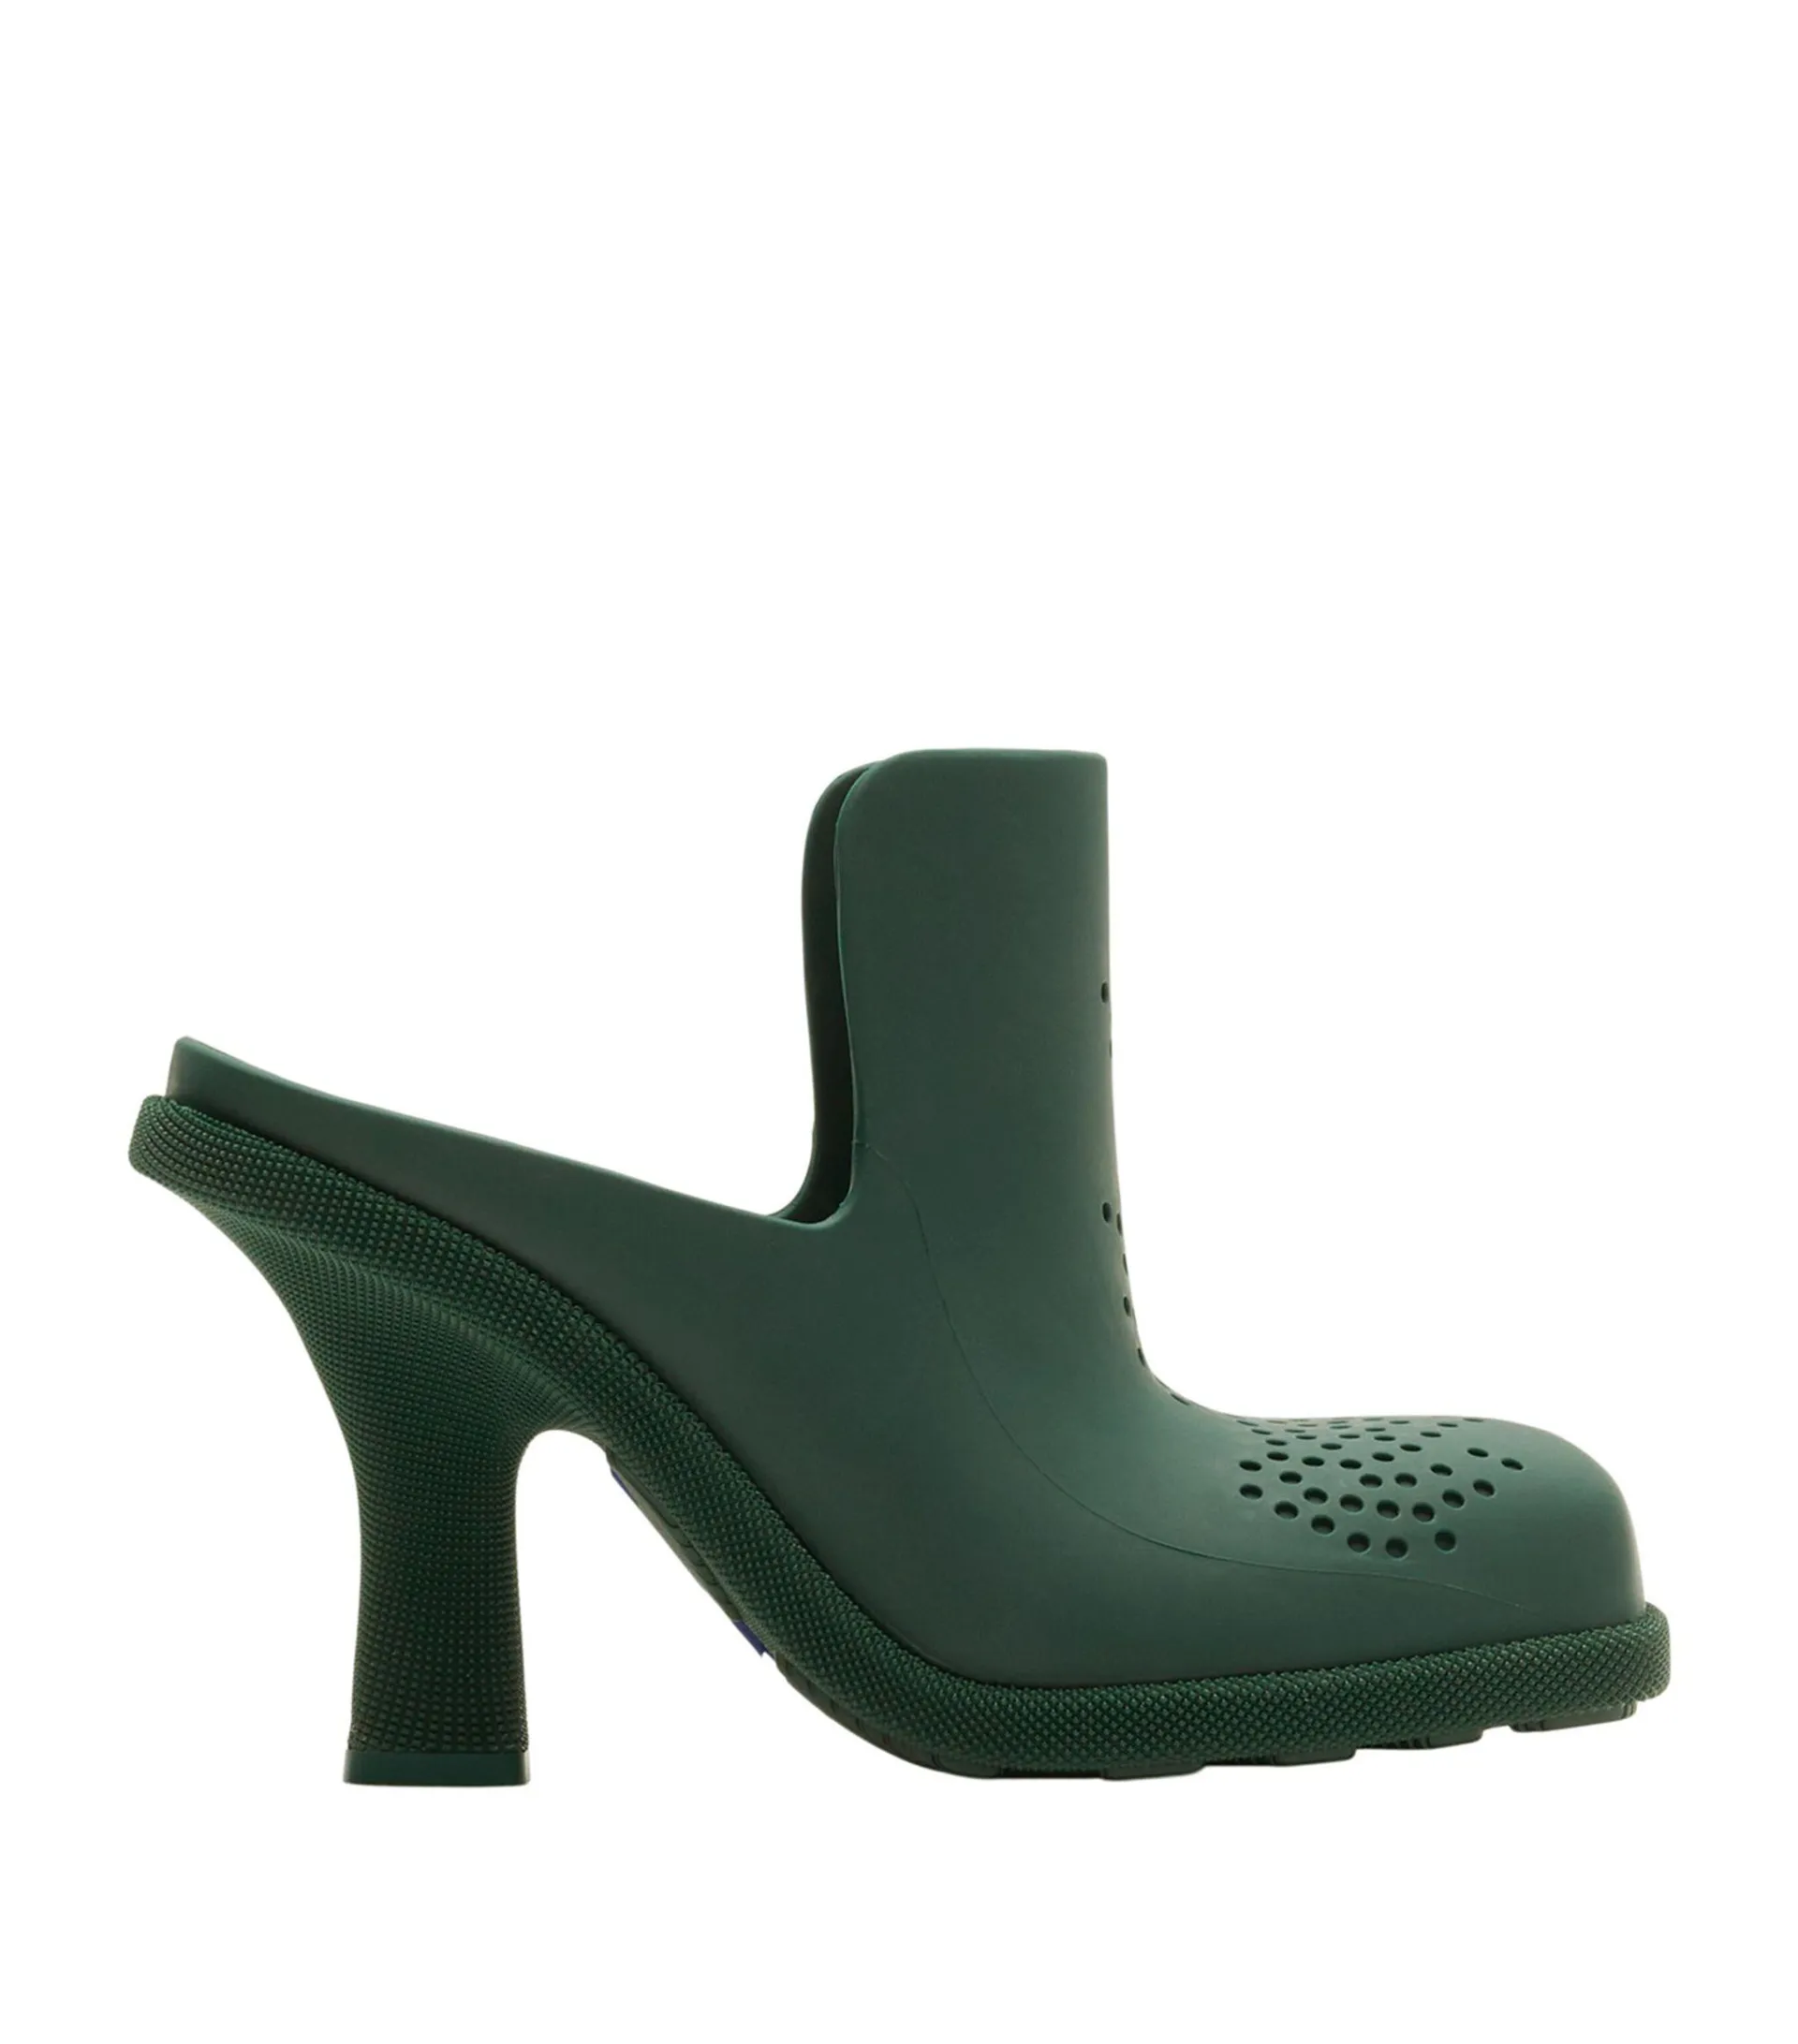 EXCLUSIVE Highland Heeled Mules 90